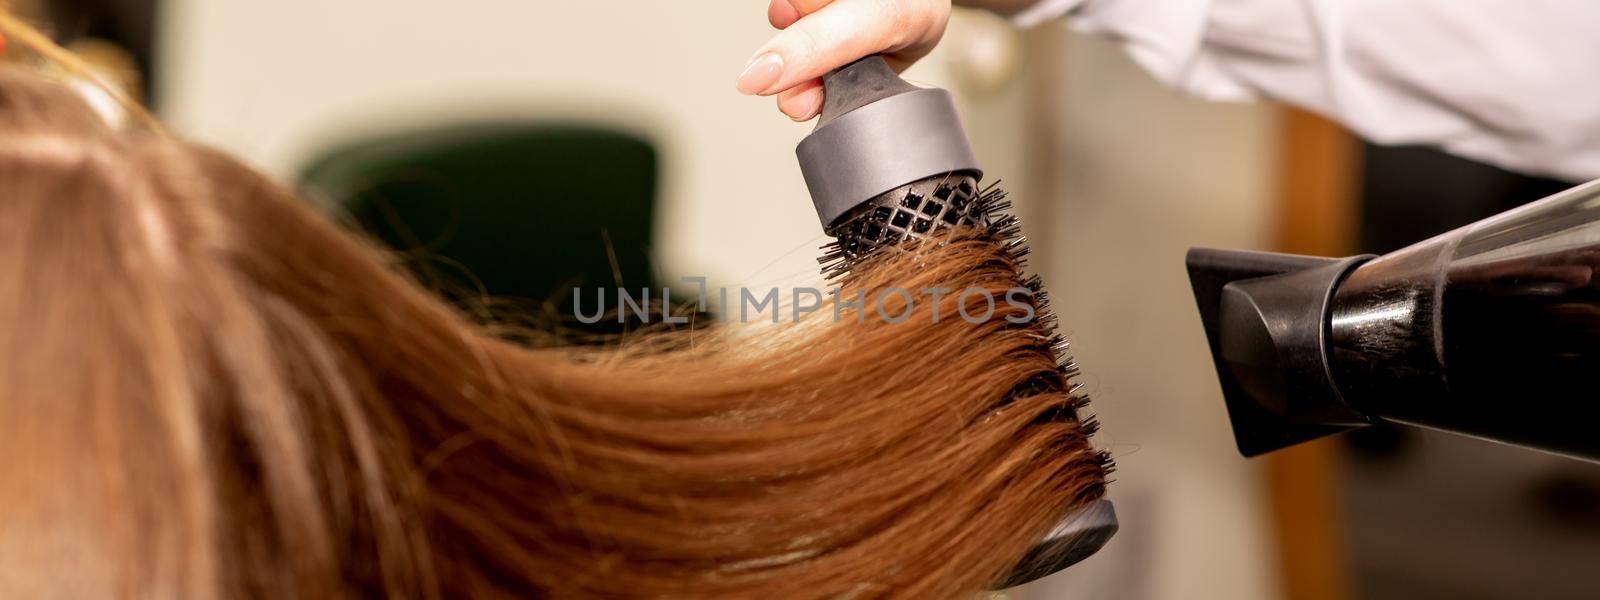 A hairdresser is drying long brown hair with a hairdryer and round brush in a beauty salon. by okskukuruza